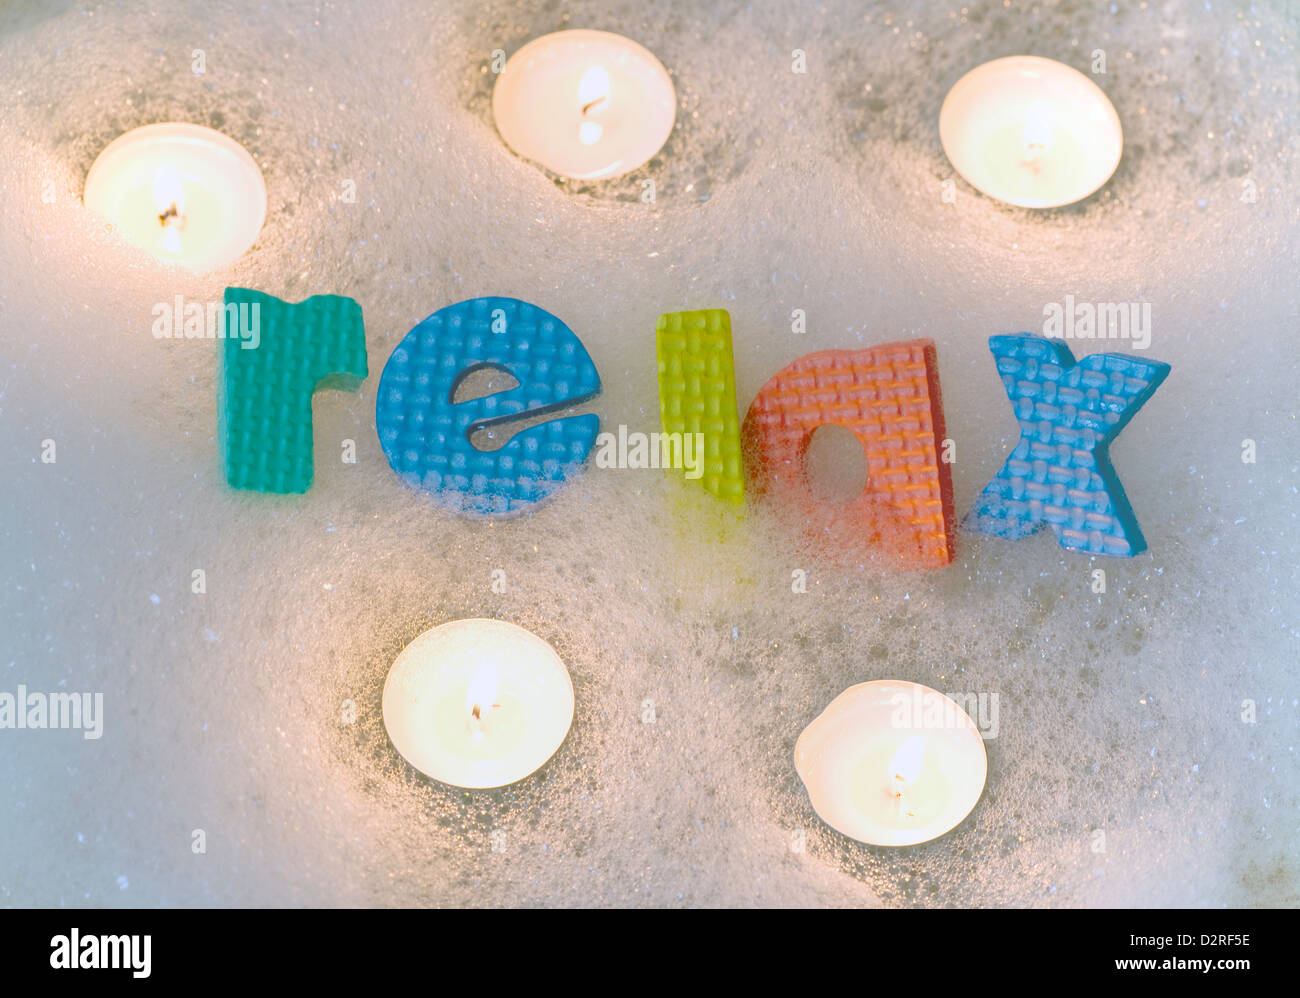 Relax with candles bath time abstract Stock Photo